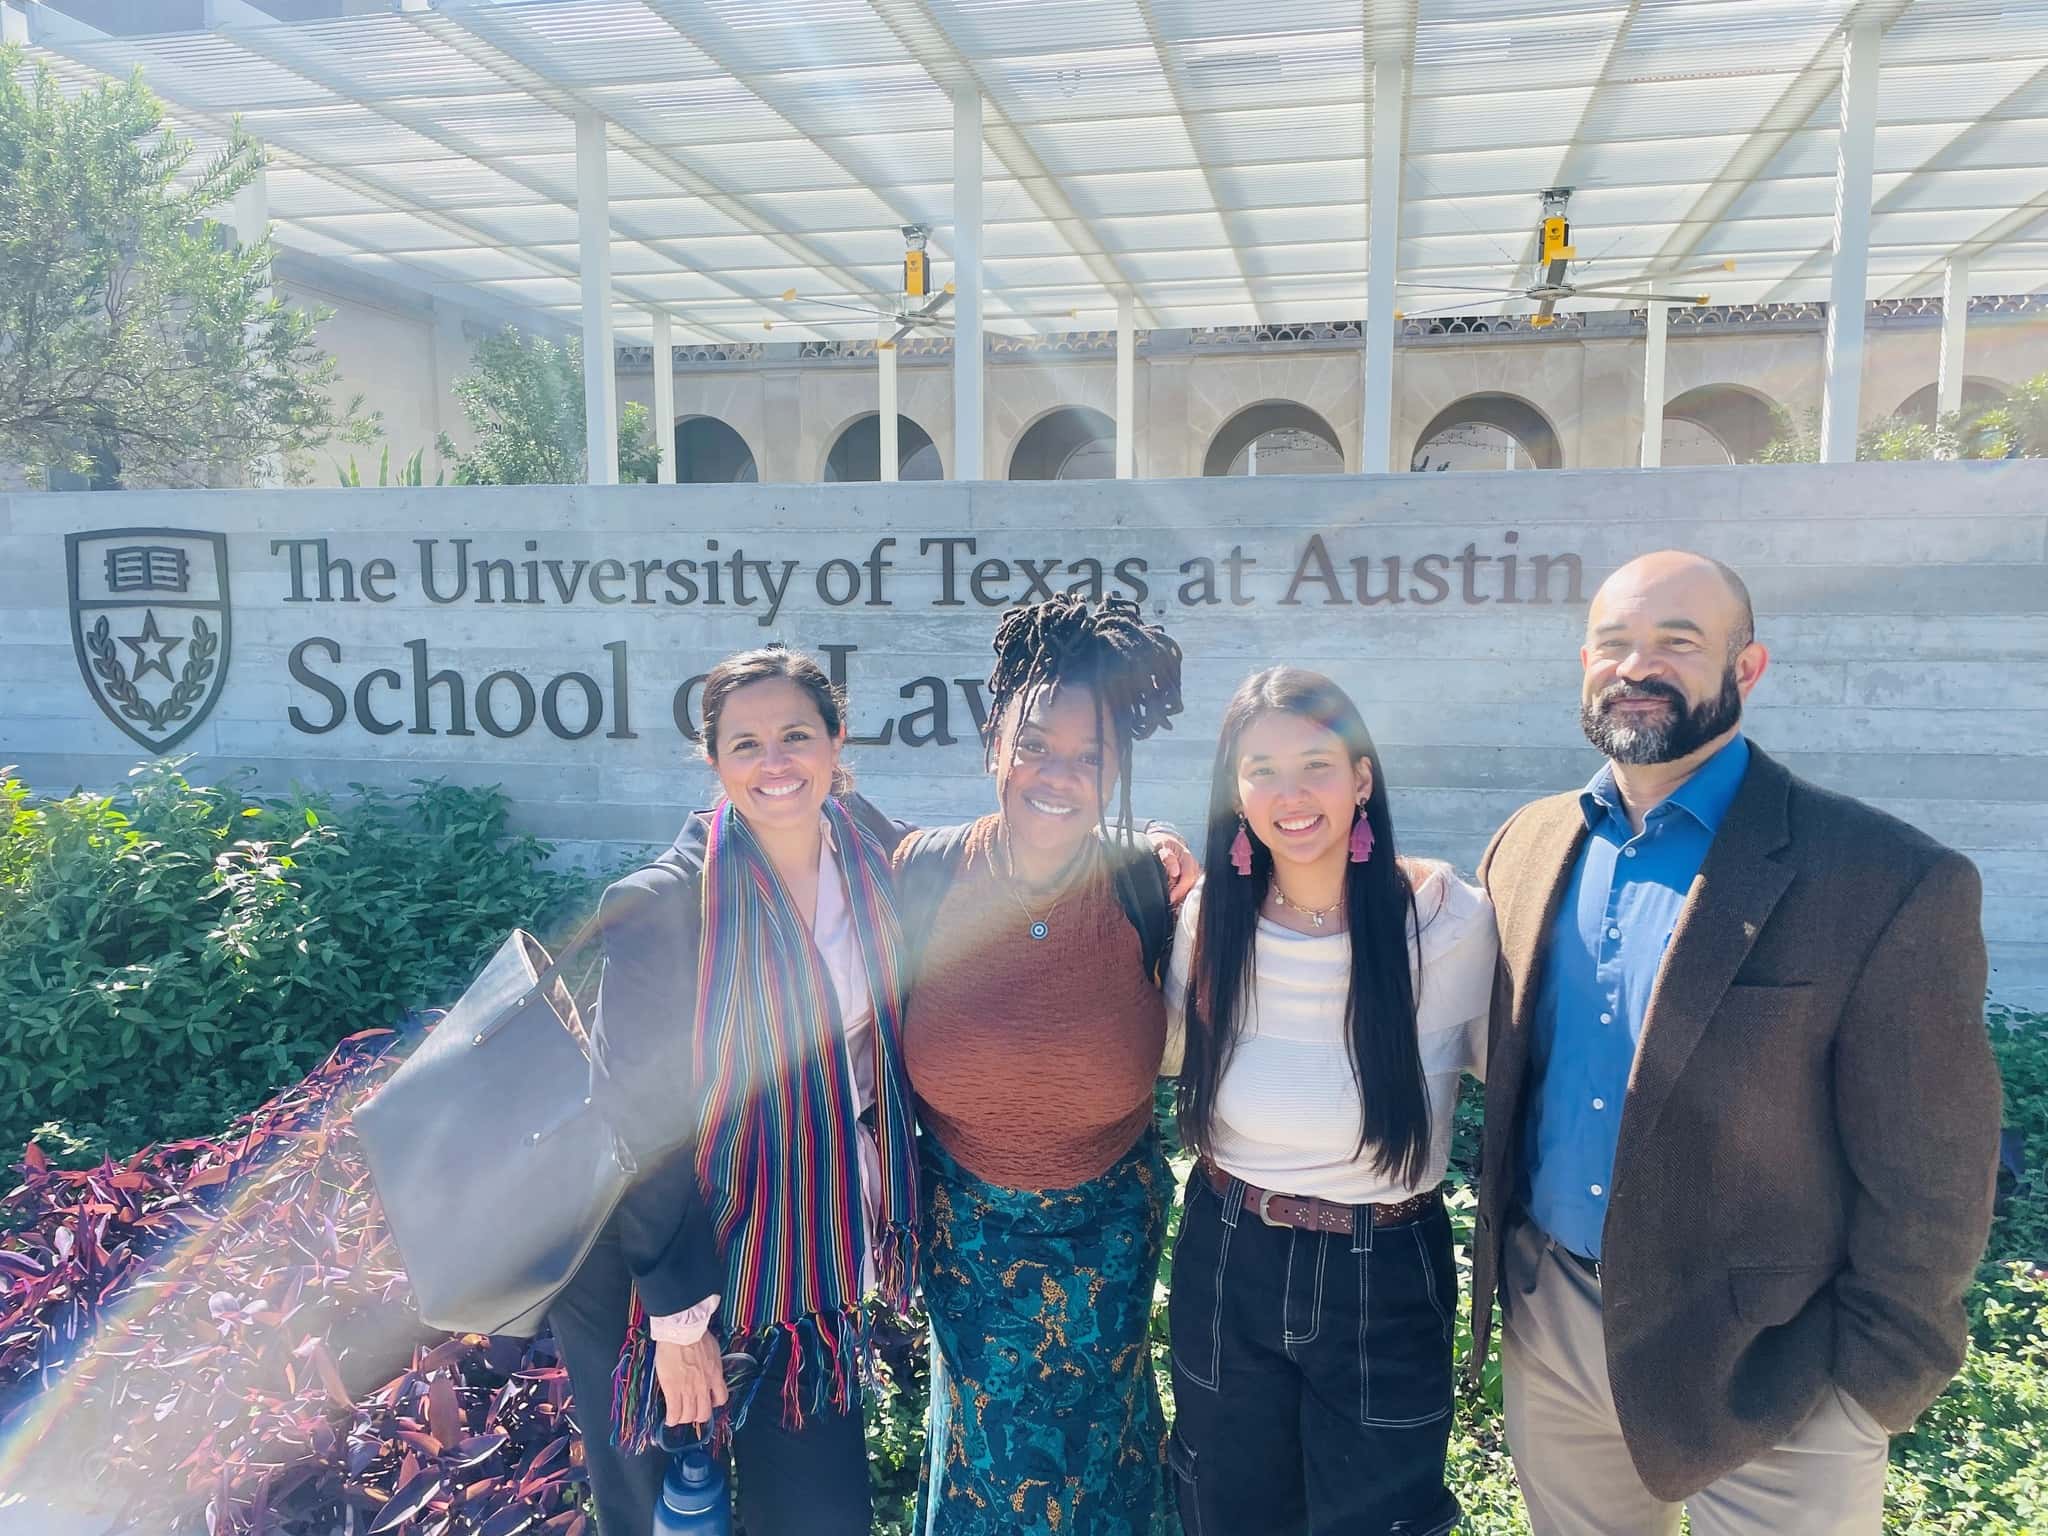 Four people stand in front of a sign that reads "The University of Texas at Austin, School of Law.'